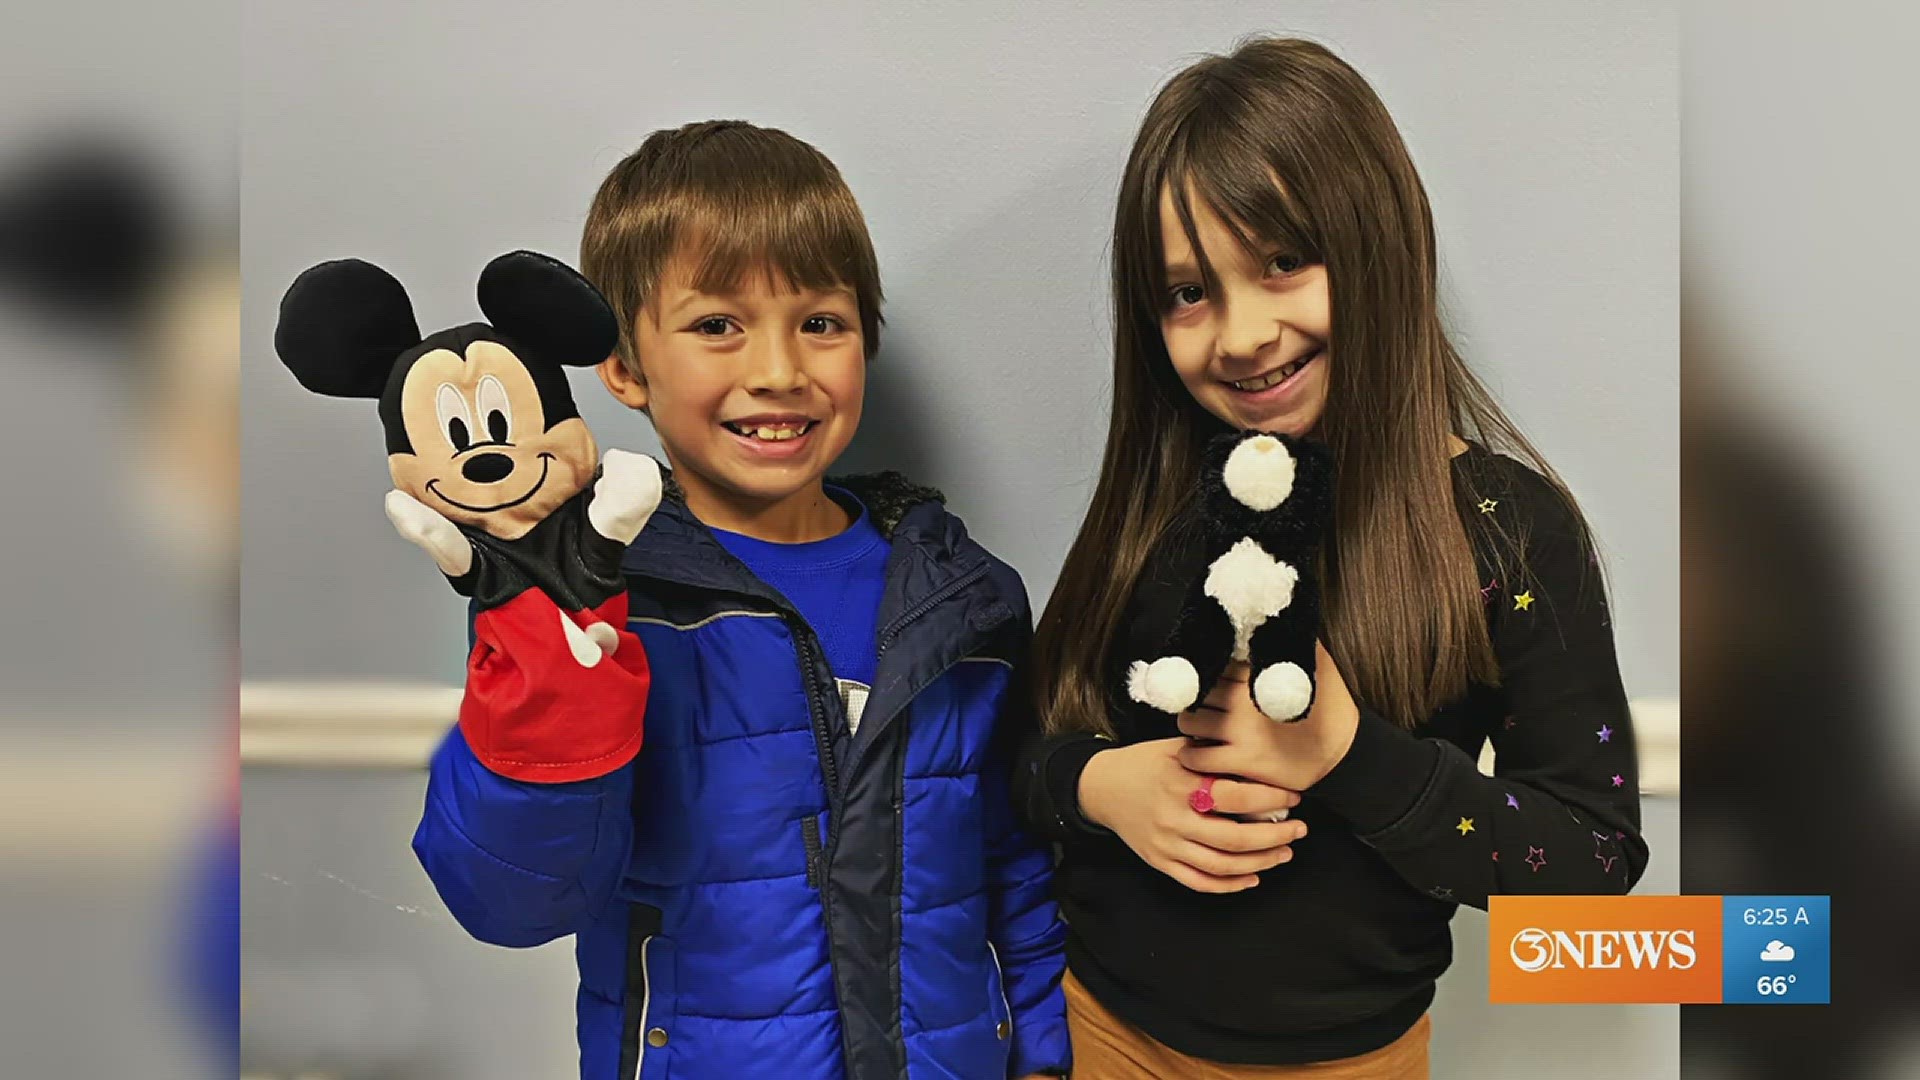 Meet two really fun siblings! Big sister Renesmee and her little brother Severo are the latest cool kids featured in our 'Perfect Addition' series.